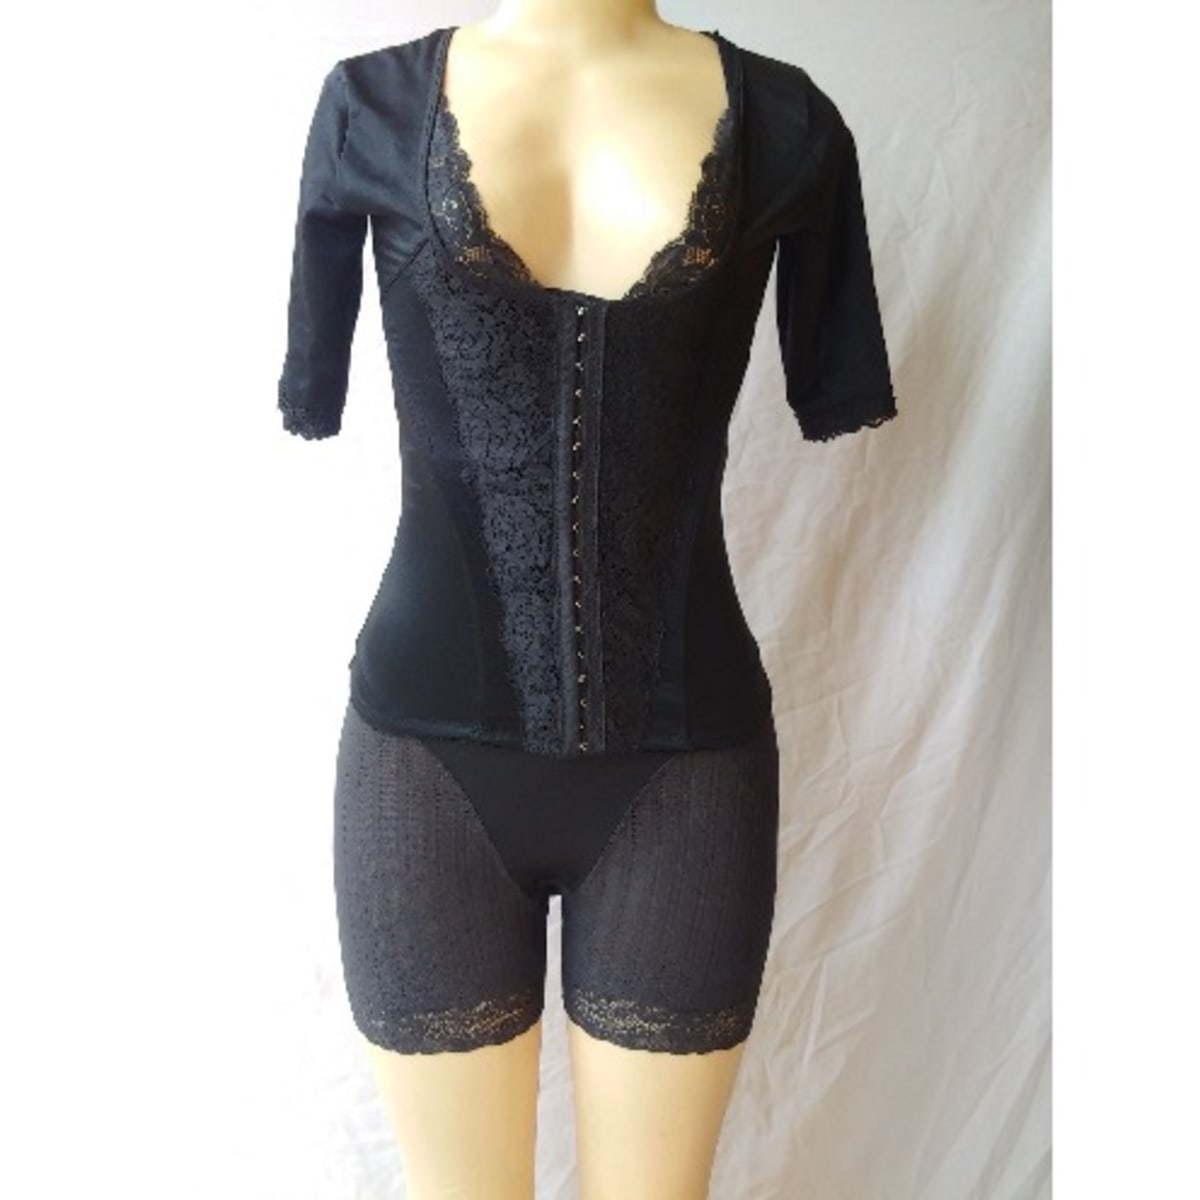 Blouse-like Shapewear For Upperarms And Tummy - Short Sleeve